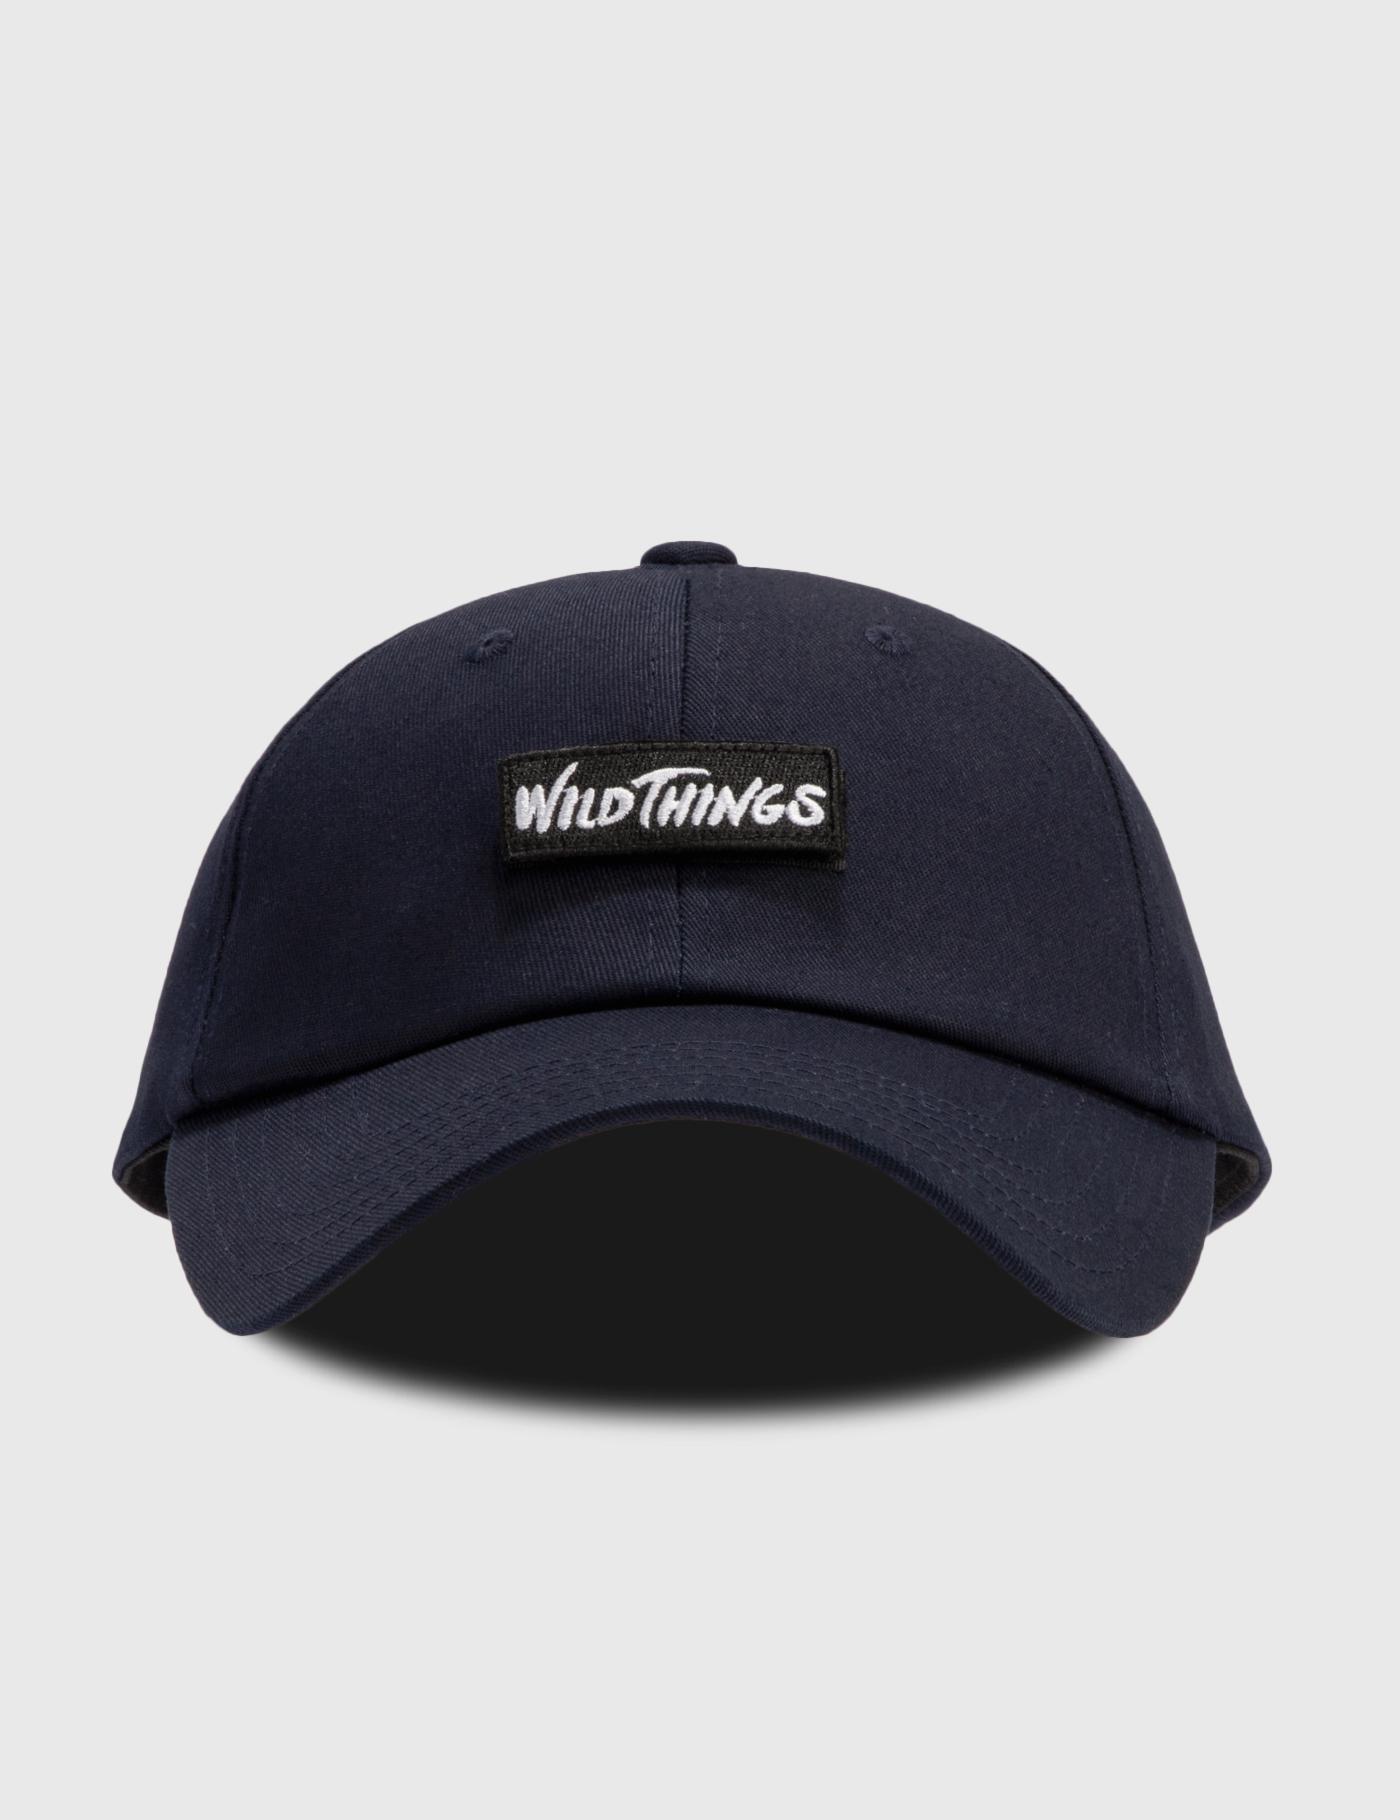 TWILL 6 PANEL CAP by WILD THINGS